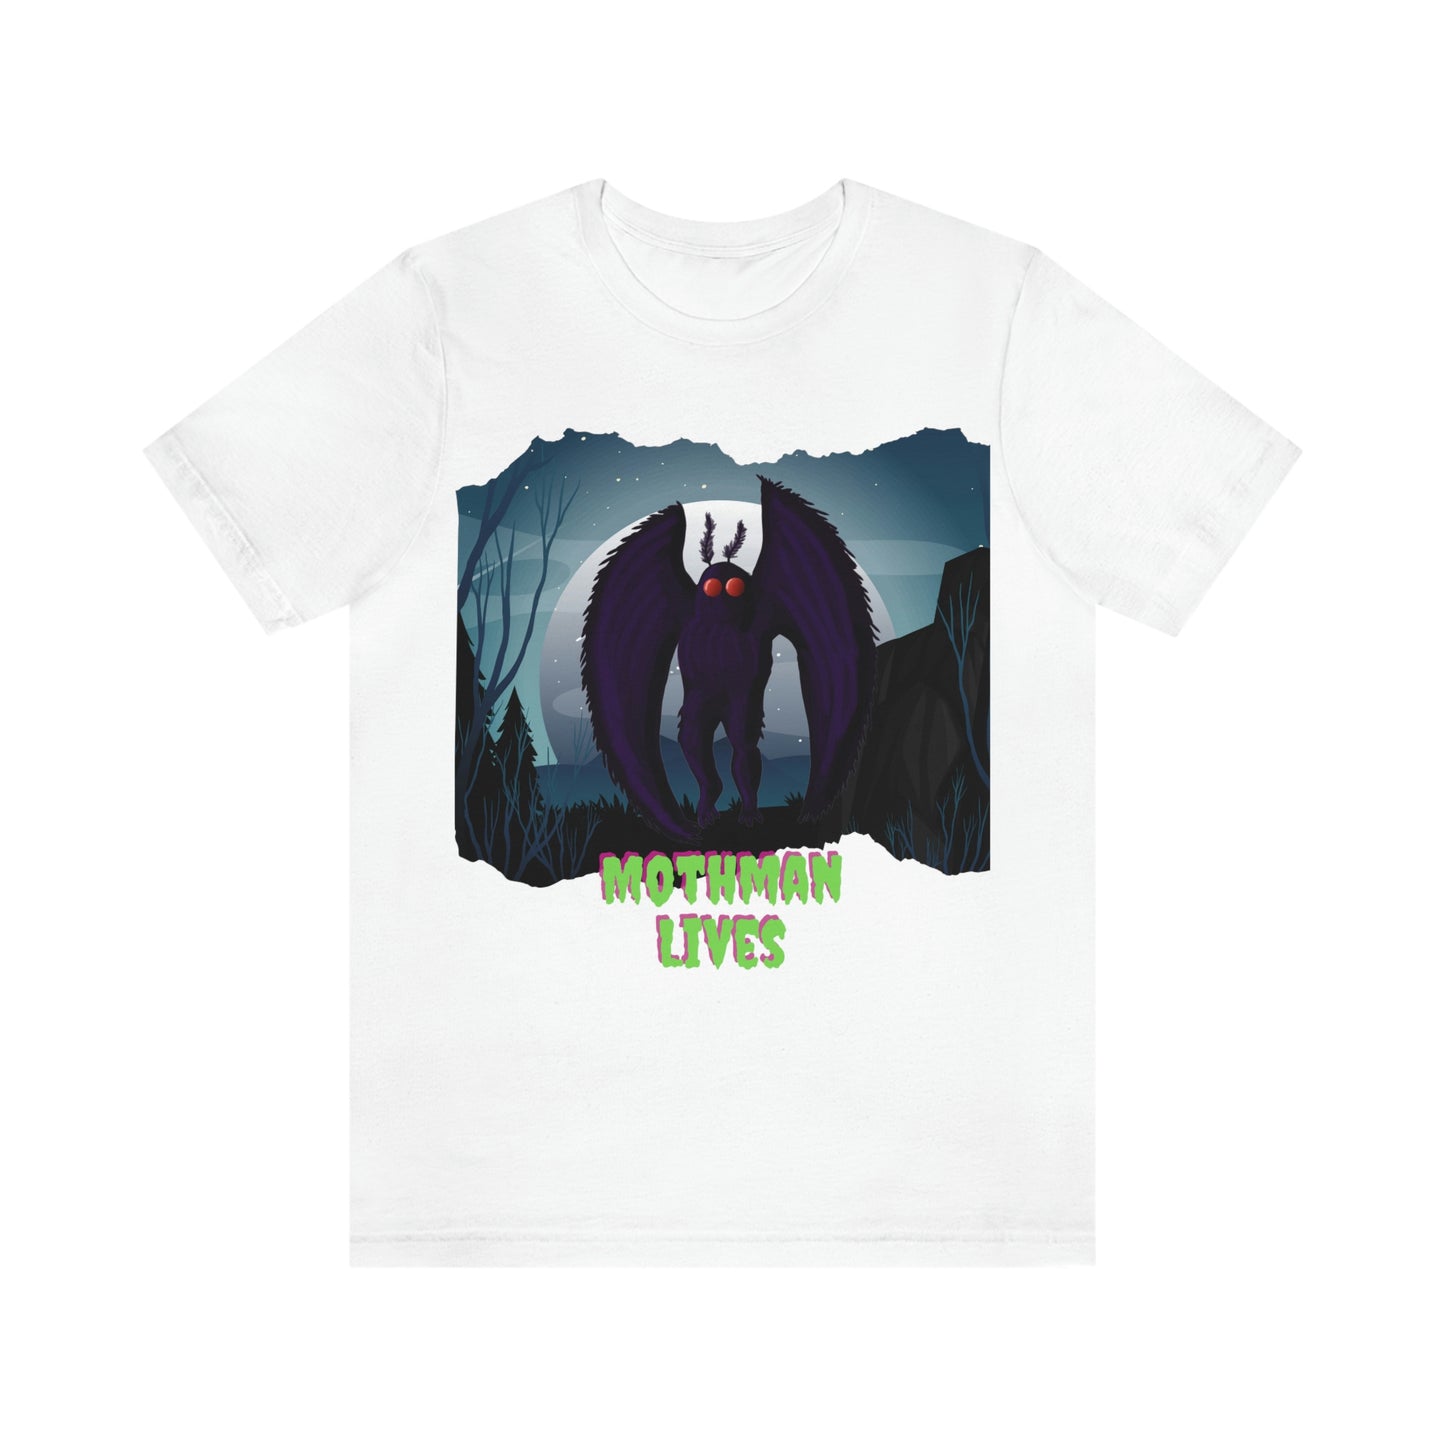 Mothman lives shirt- Awesome Cryptid Tshirt Lord and Lady Towers